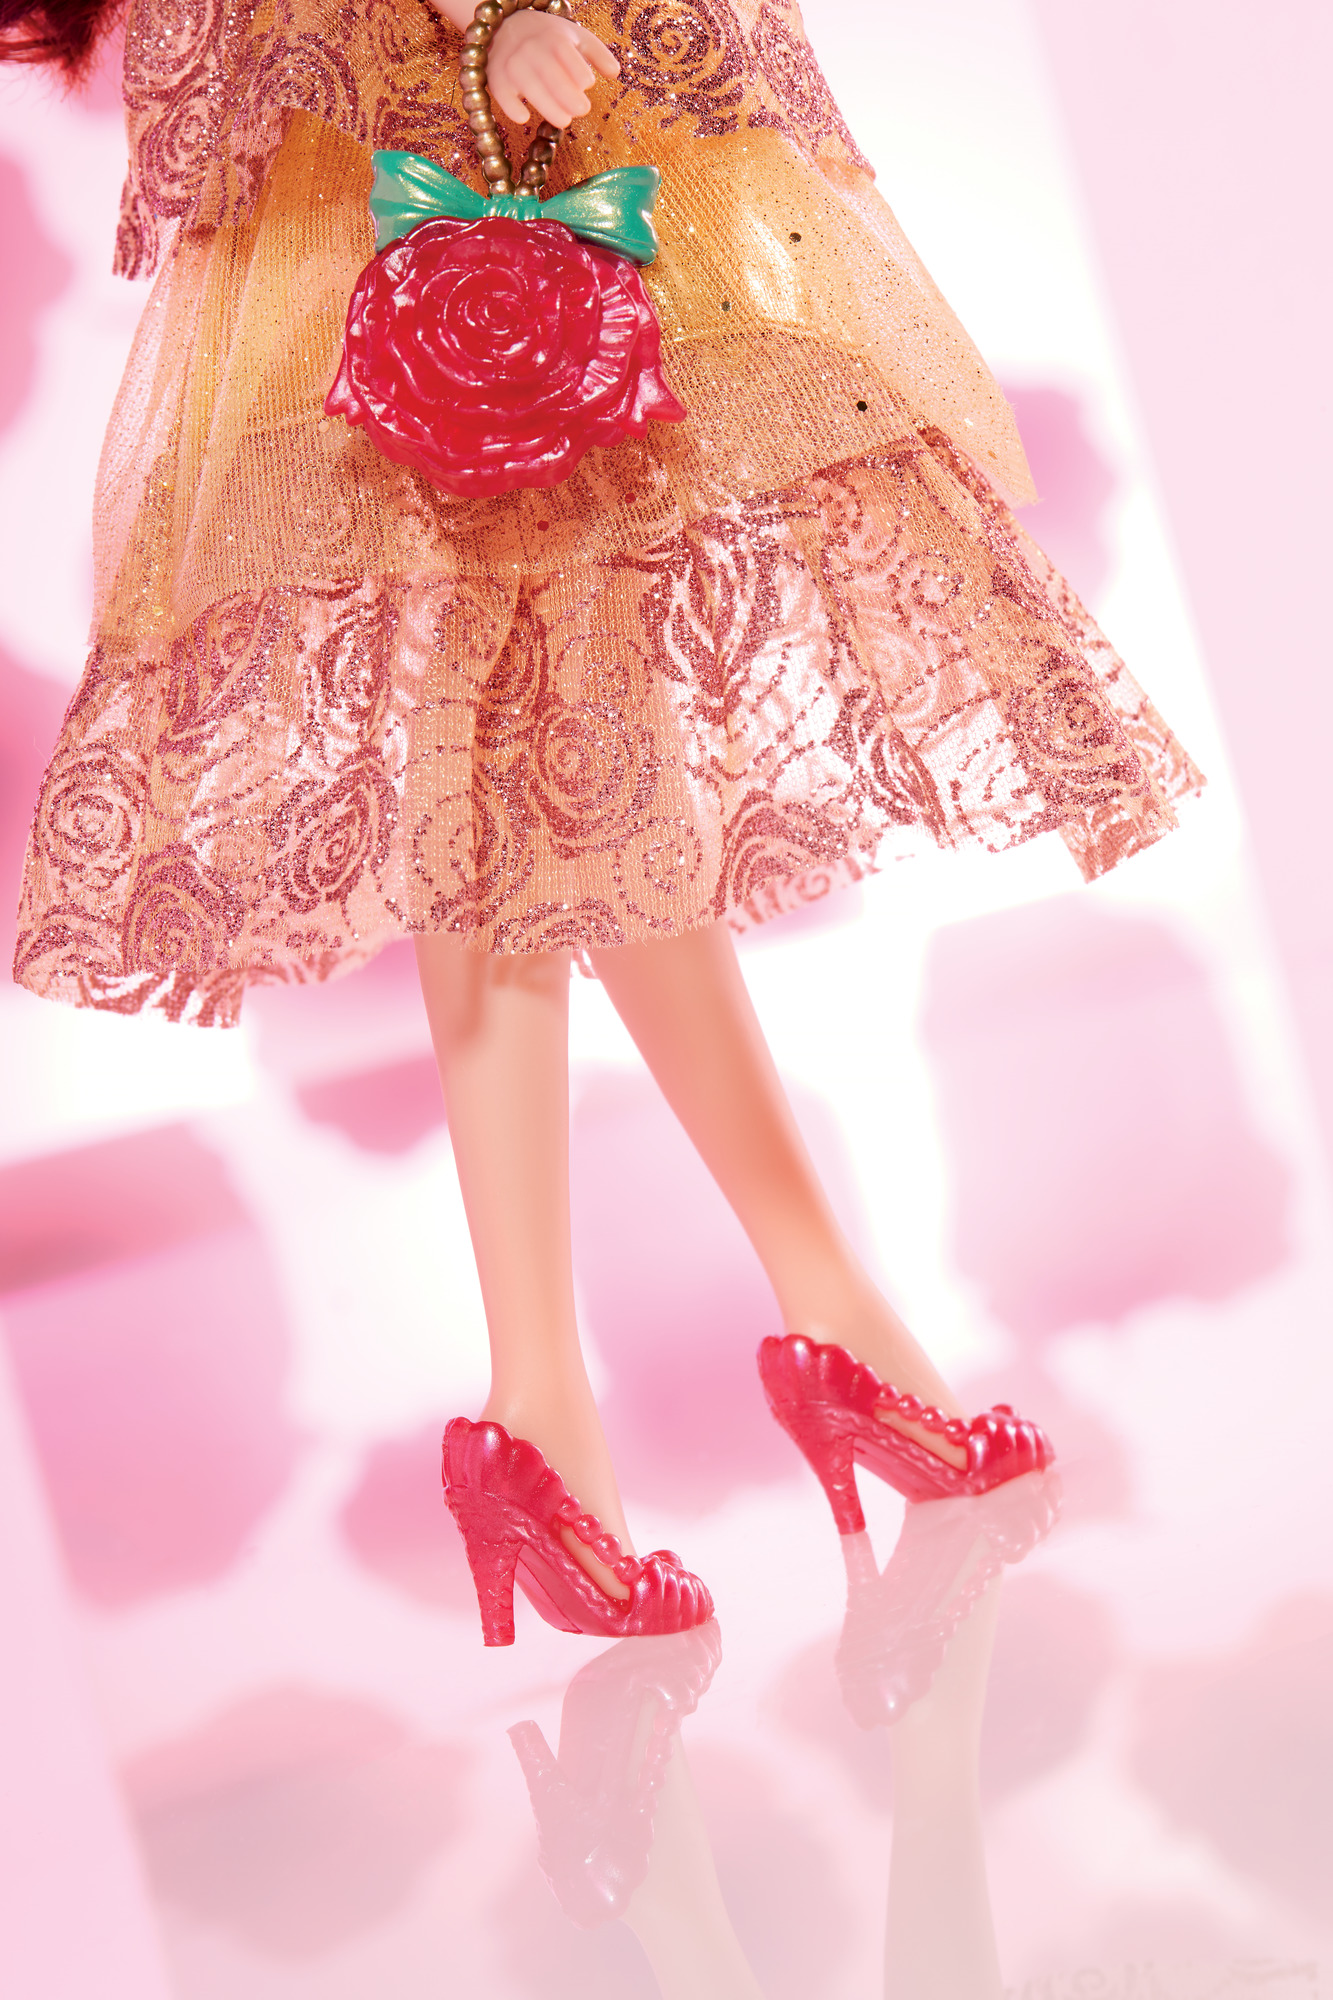 Disney Princess Style Series, Belle Fashion Doll In Contemporary Style - image 6 of 9